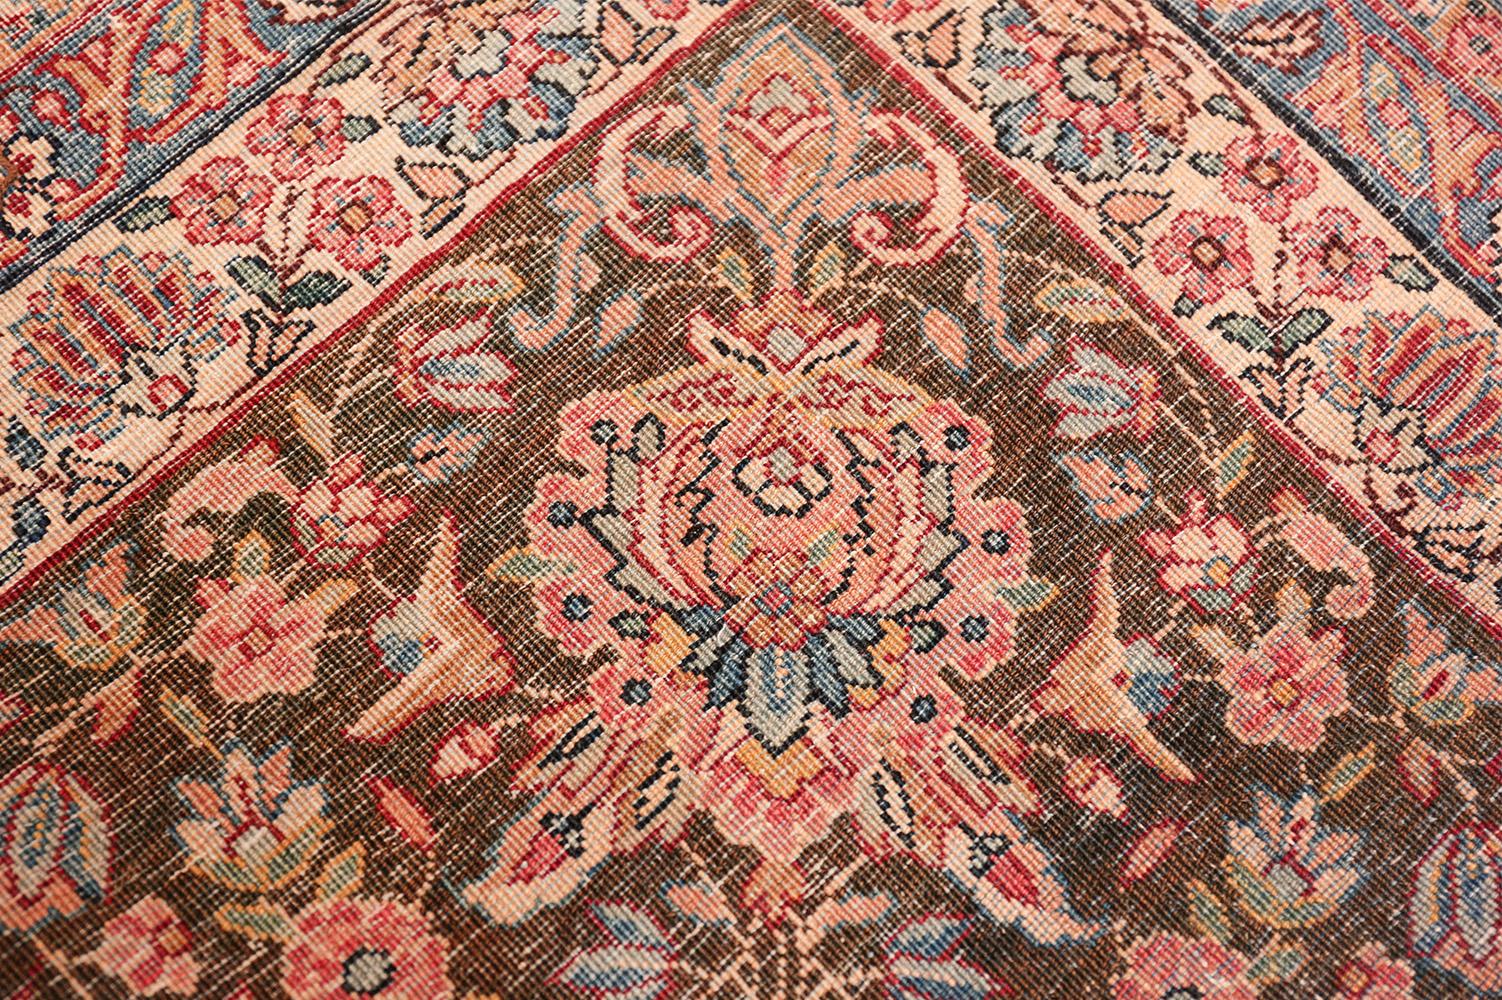 Antique Kerman Persian Rug. Size: 9 ft 9 in x 17 ft 3 in (2.97 m x 5.26 m) 8